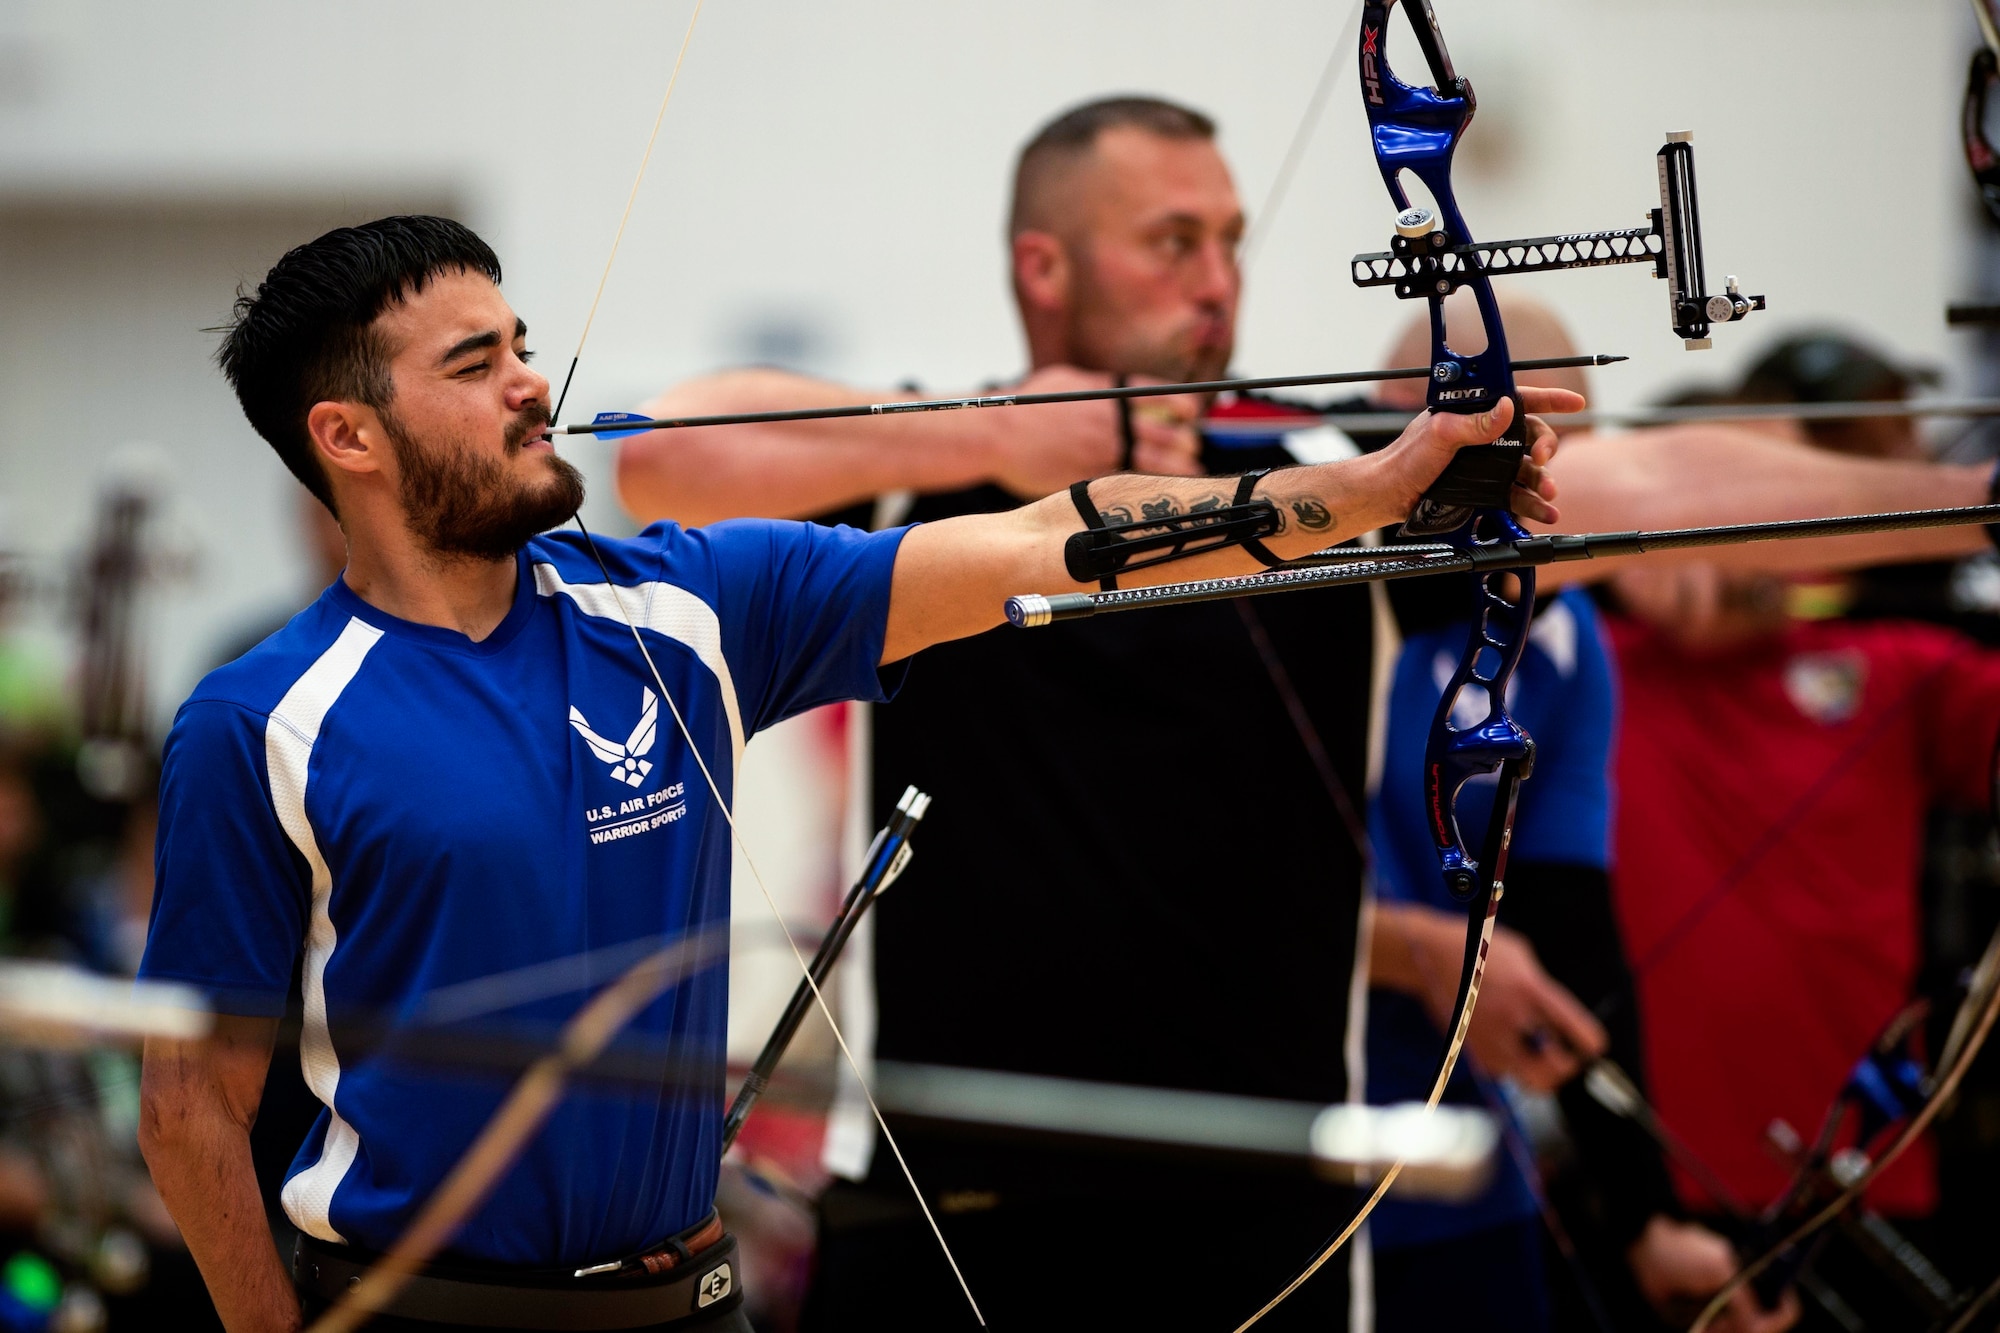 Air Force athlete Daniel Crain aims at his target in an archery qualification round during the 2014 Warrior Games Oct. 1, 2014, at the U.S. Olympic Training Center in Colorado Springs, Colo. The Warrior Games consist of athletes from the Defense Department, who compete in Paralympic-style events for their respective military branch. The goal of the games is to help highlight the potential of warriors through competitive sports. (U.S. Air Force photo/Airman 1st Class Scott Jackson)